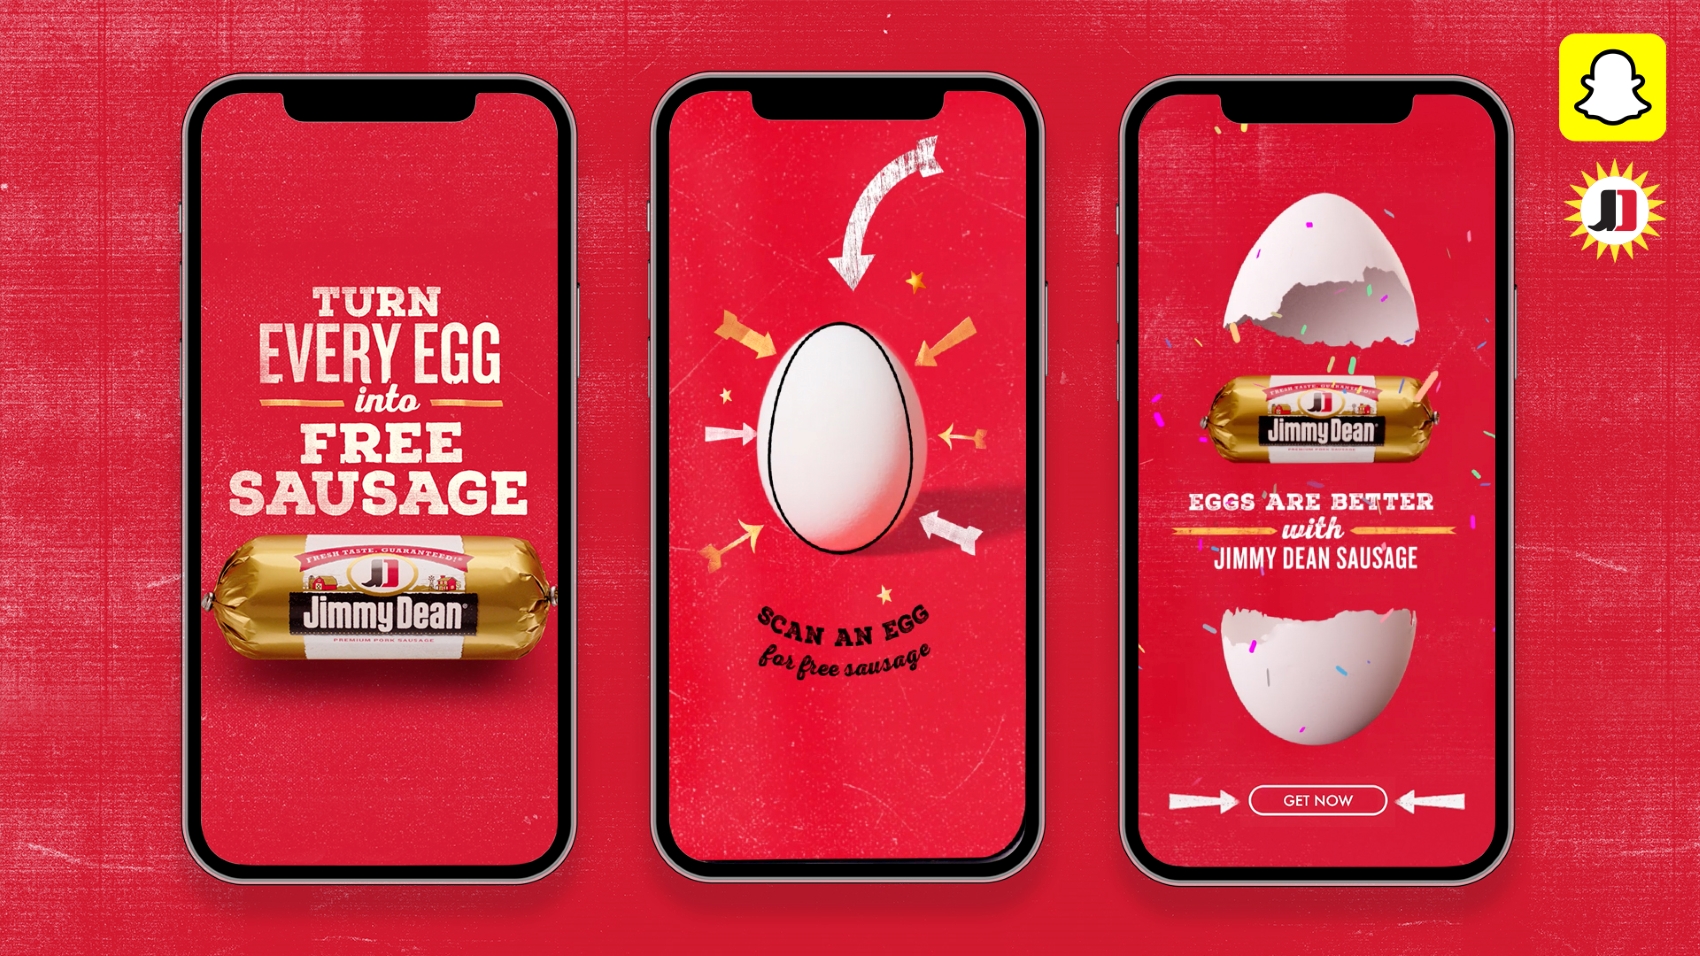 On National Egg Day, June 3, use the exclusive Jimmy Dean brand Snapchat lens to turn a fresh egg into a free roll of Jimmy Dean sausage.